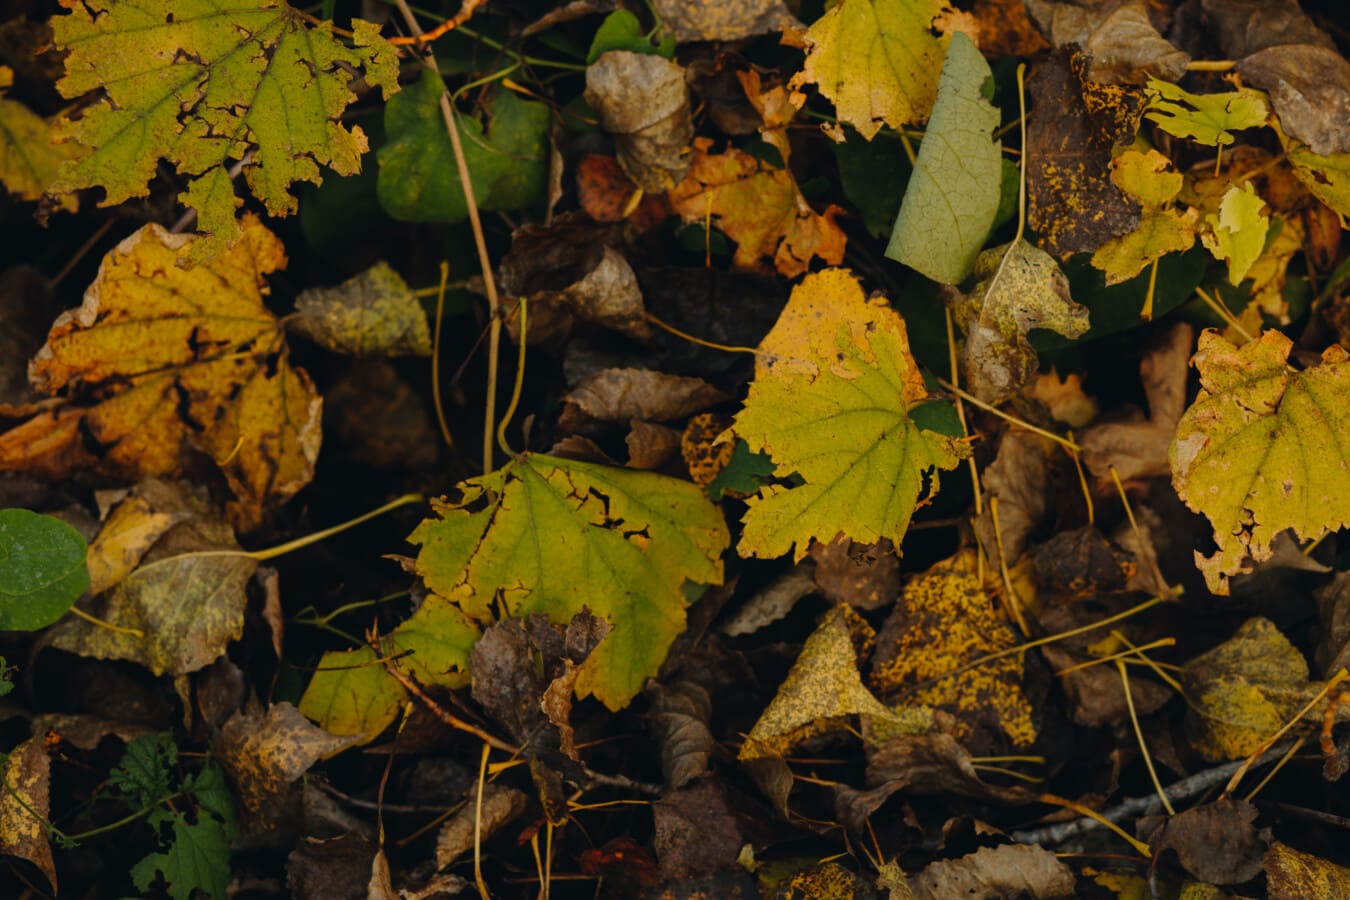 dry, leaves, autumn season, ground, decomposition, leaf, autumn, nature, outdoors, yellow